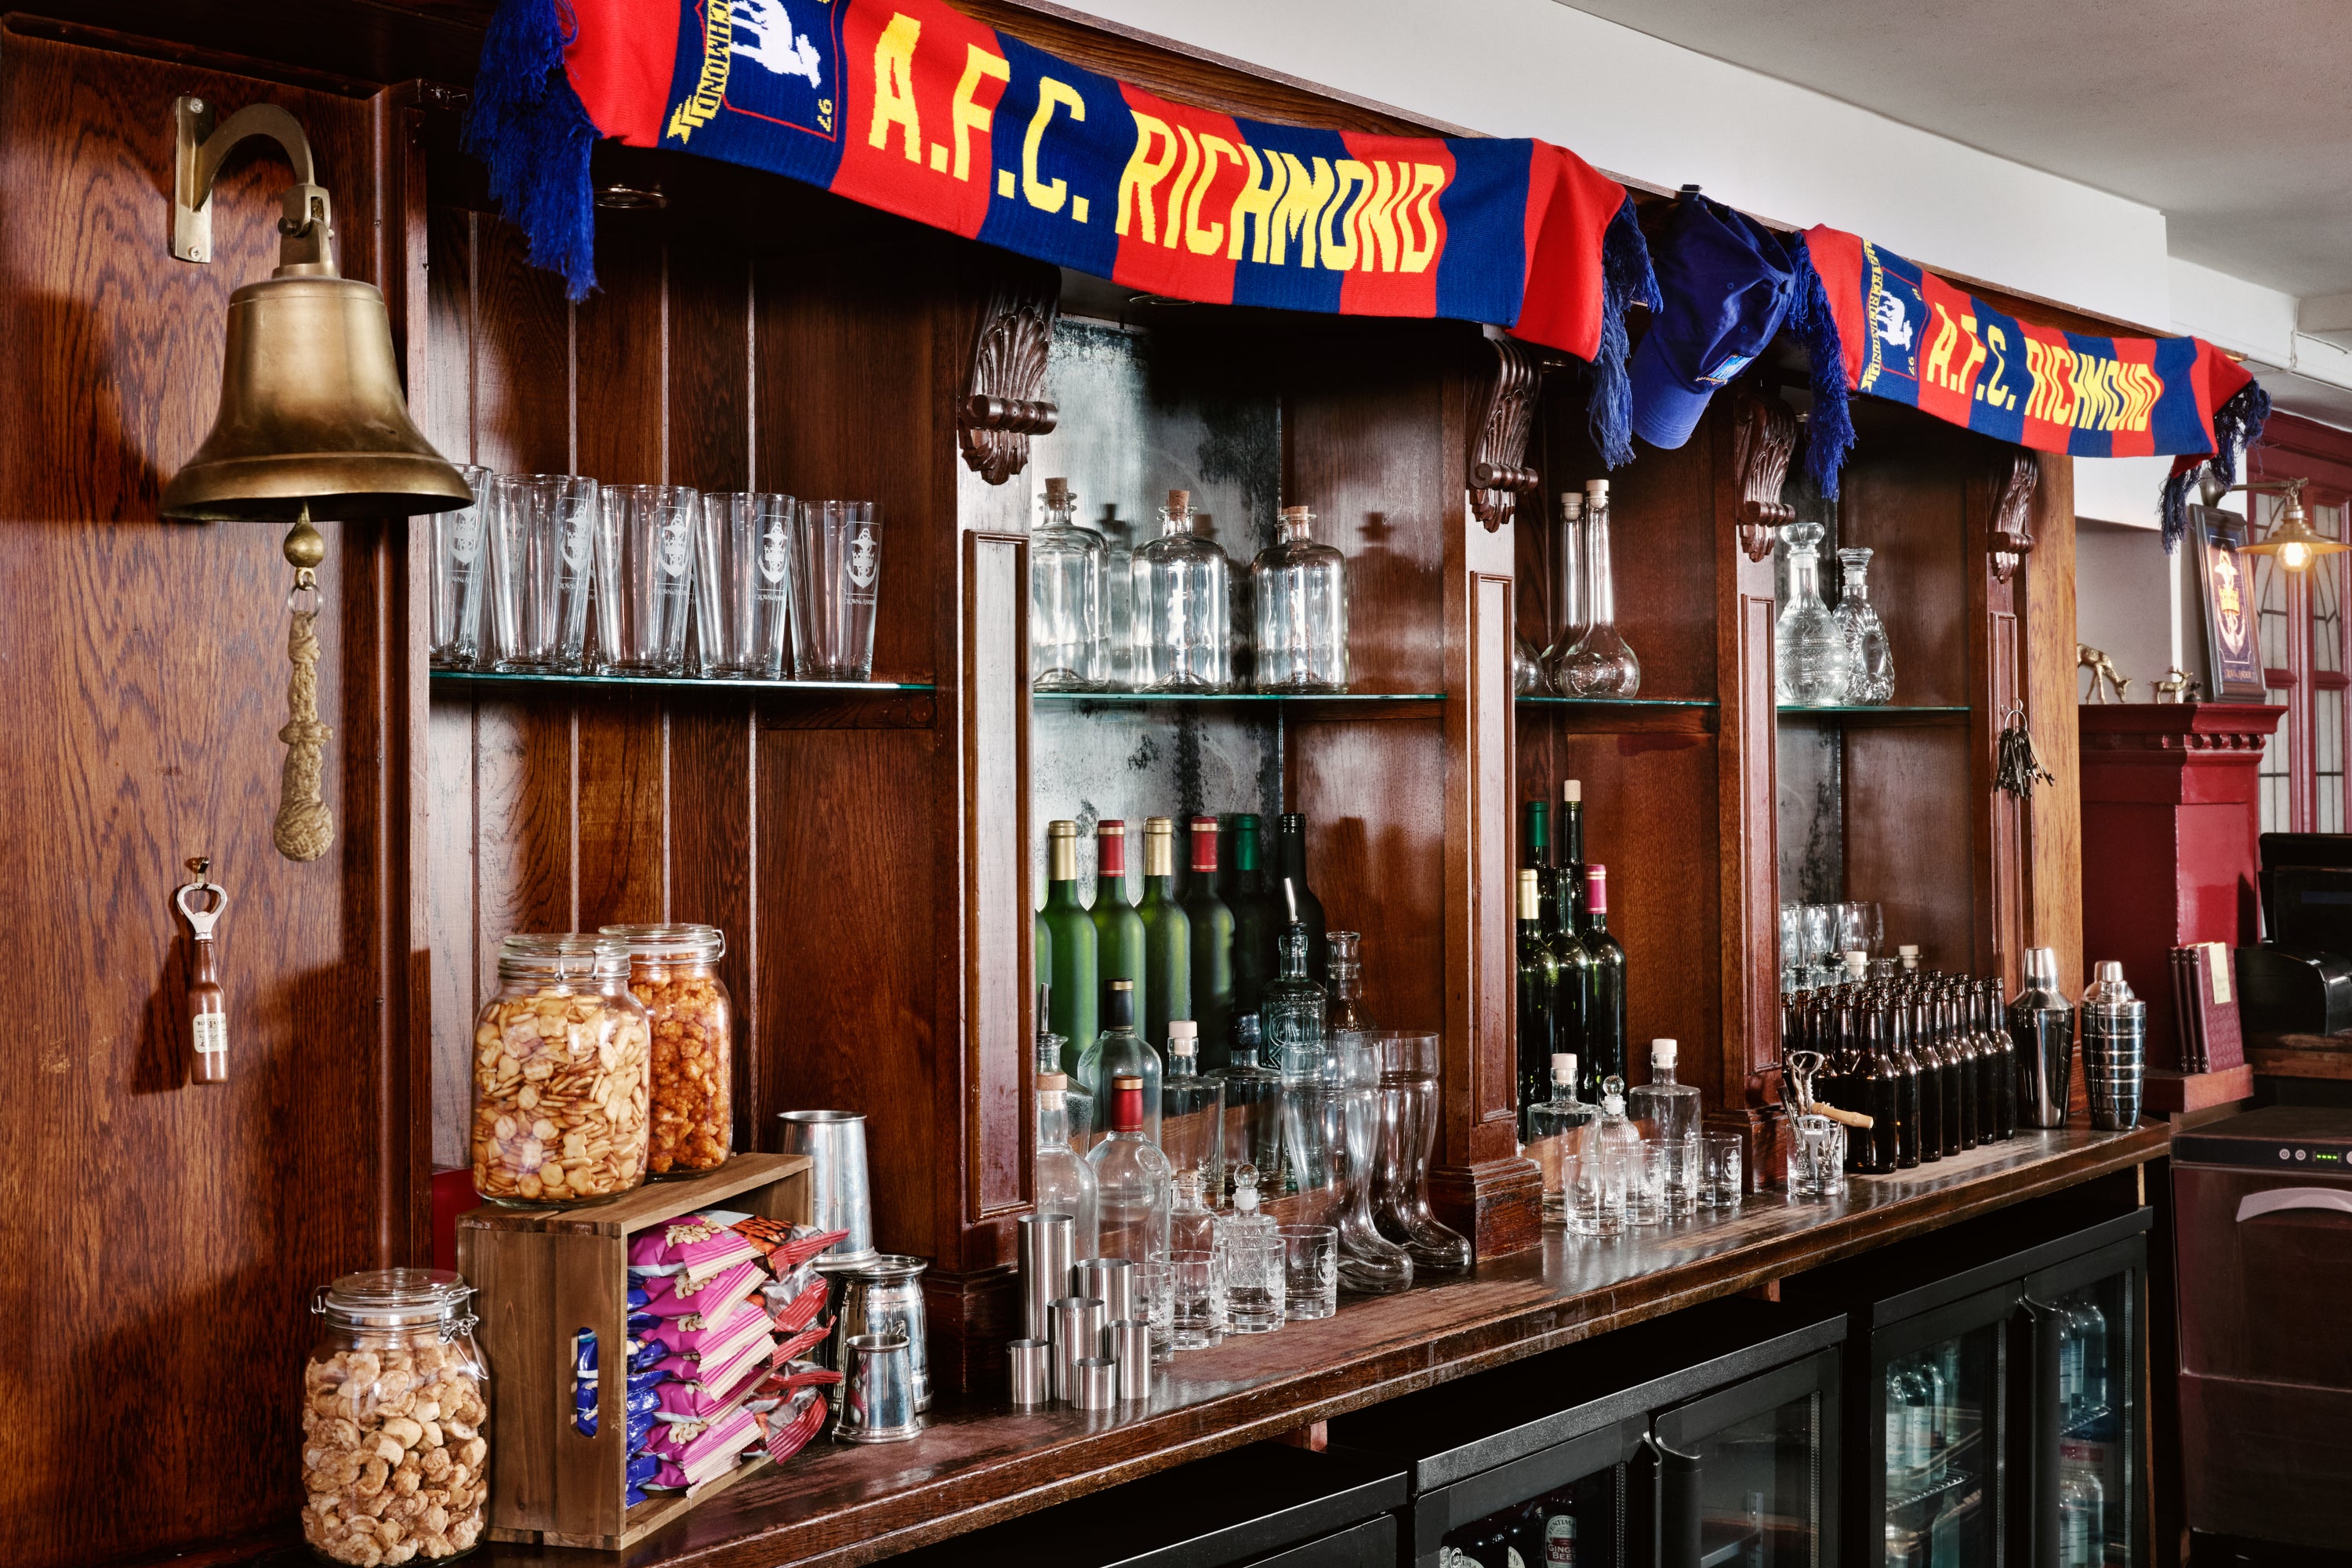 The pub is decorated with AFC Richmond regalia